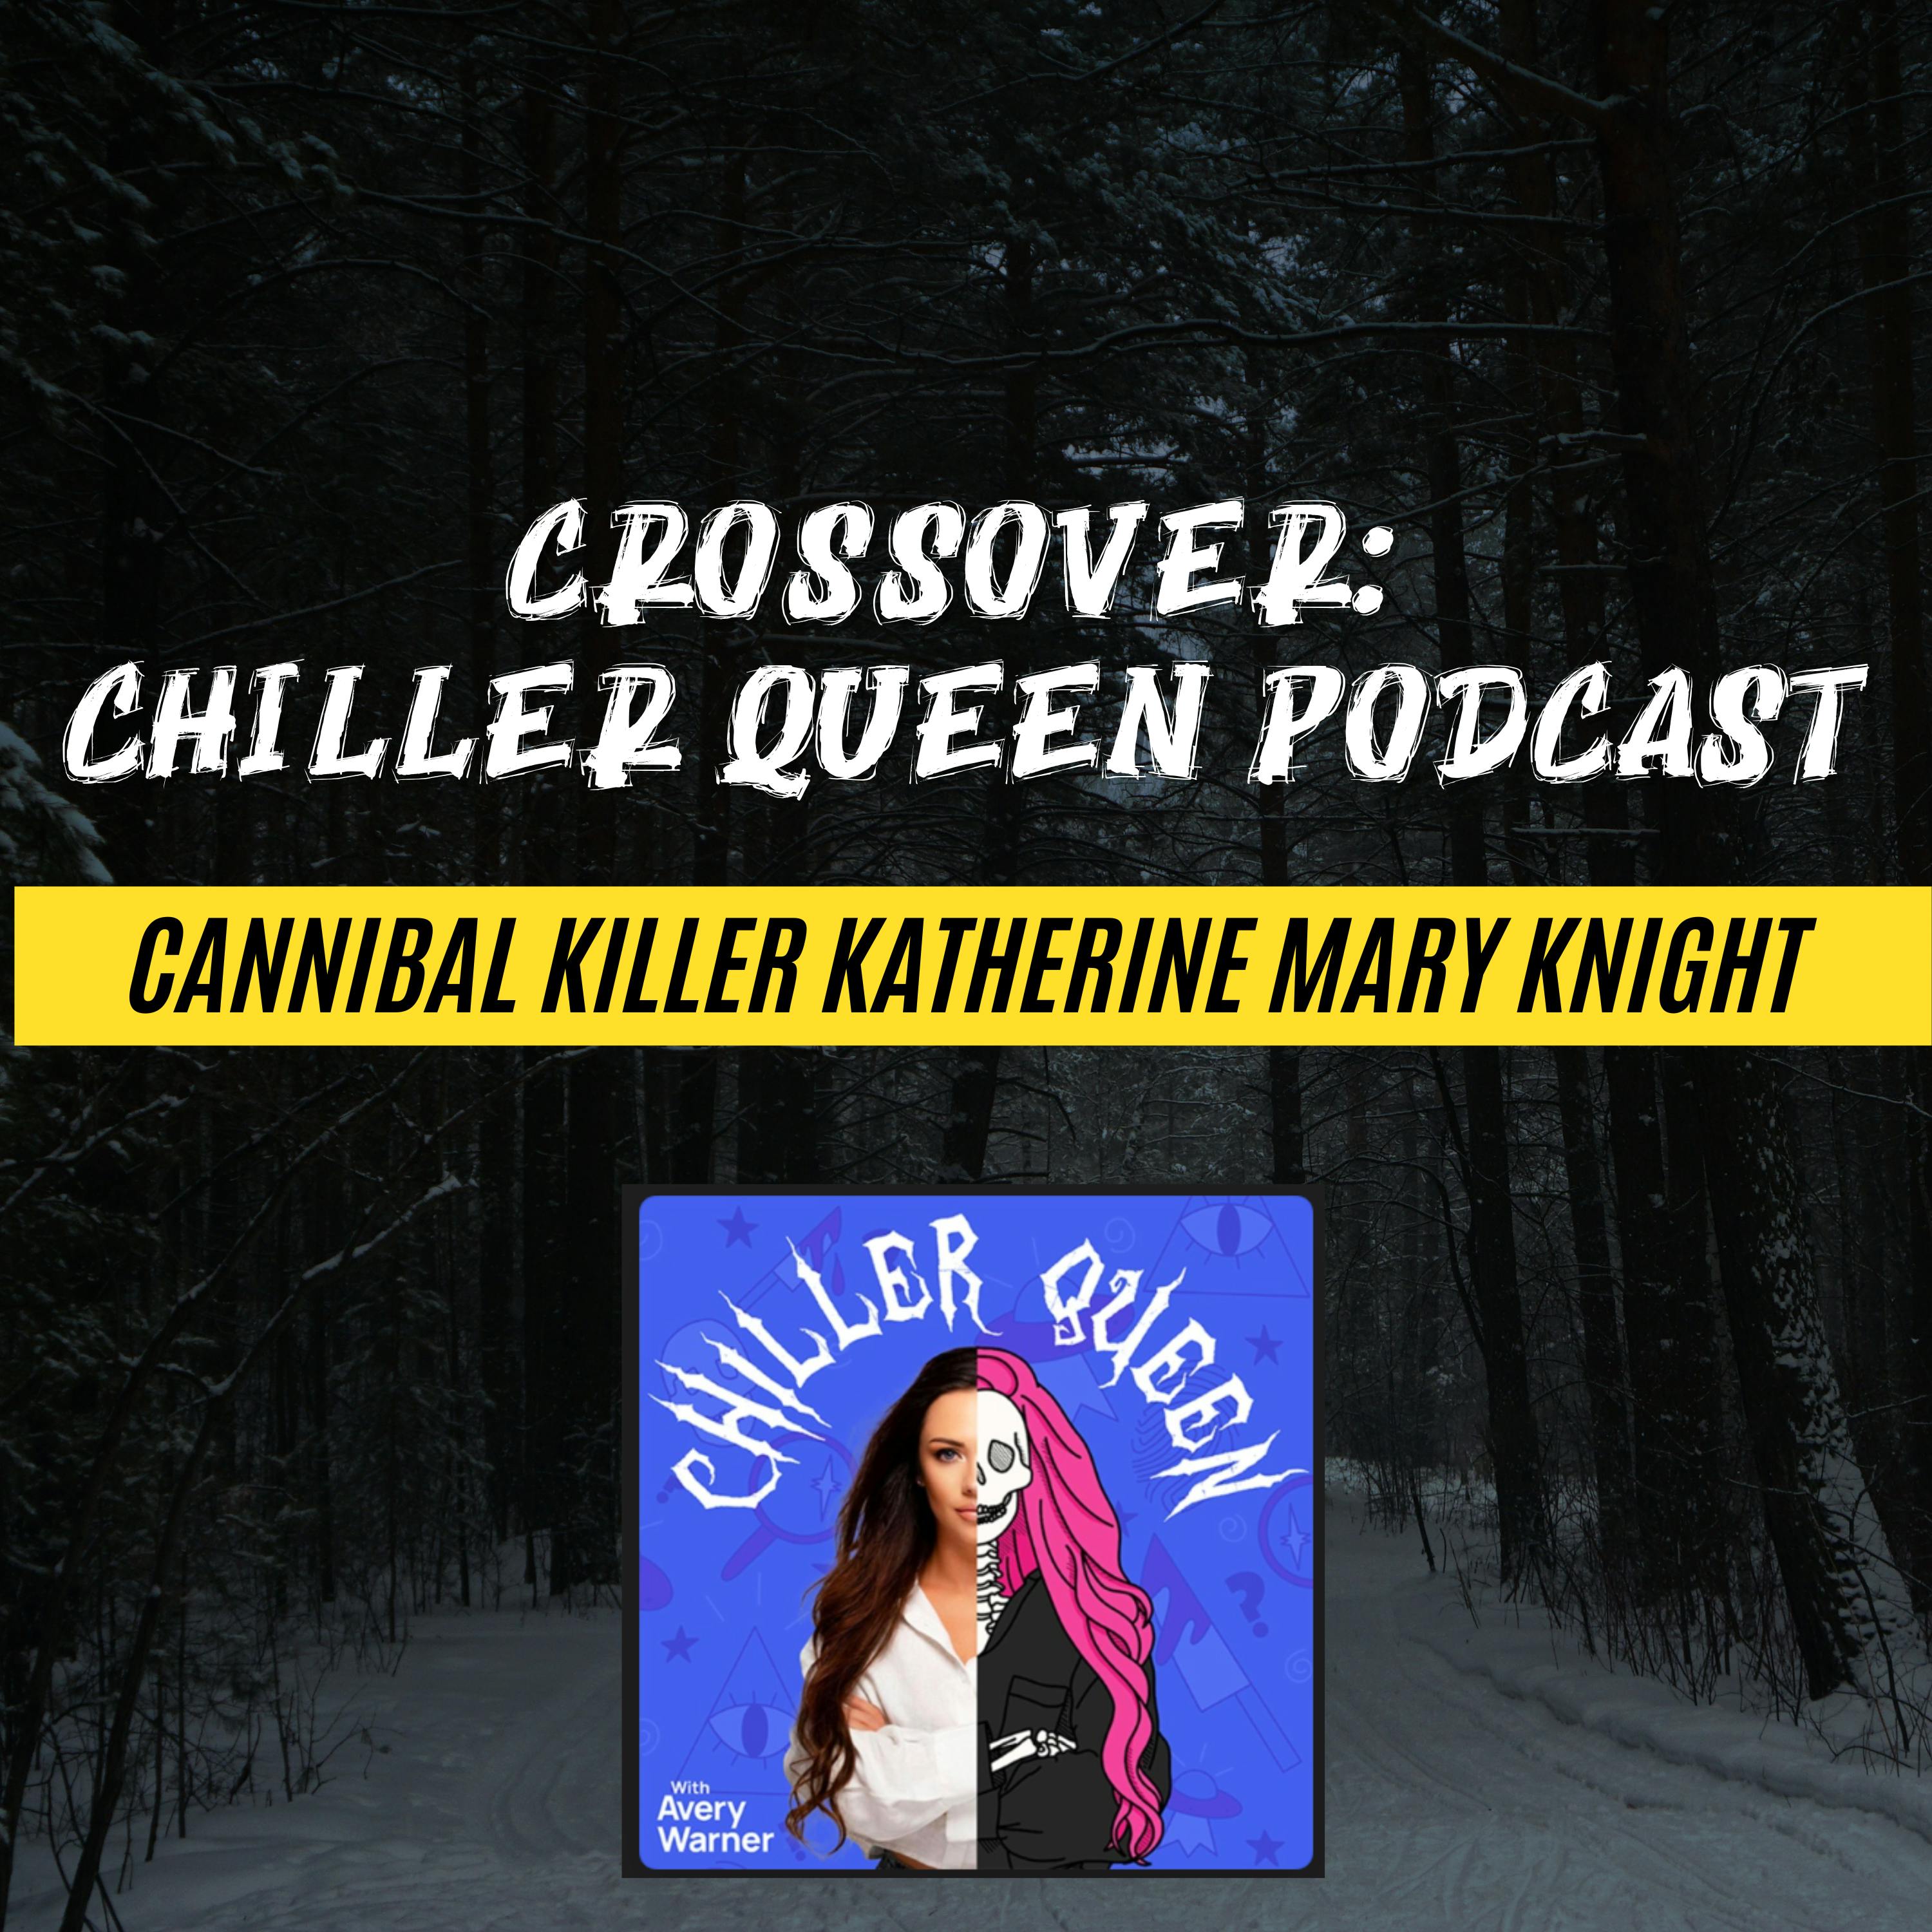 CROSSOVER: Chiller Queen Podcast - 